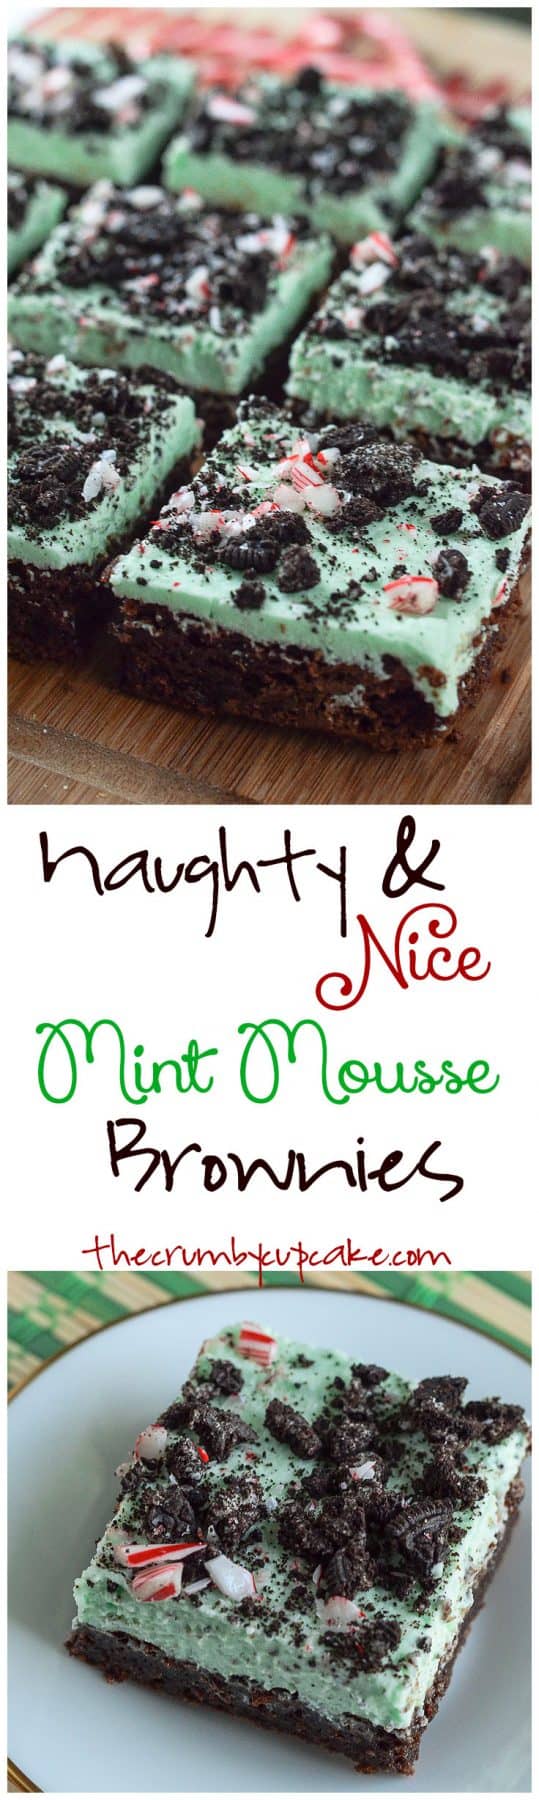 Naughty & Nice Mint Mousse Brownies | Moist and fudgy dark chocolate brownies, topped with a minty, fluffy cloud of mousse and studded with cookie crumbles (naughty) & candy canes (nice)!